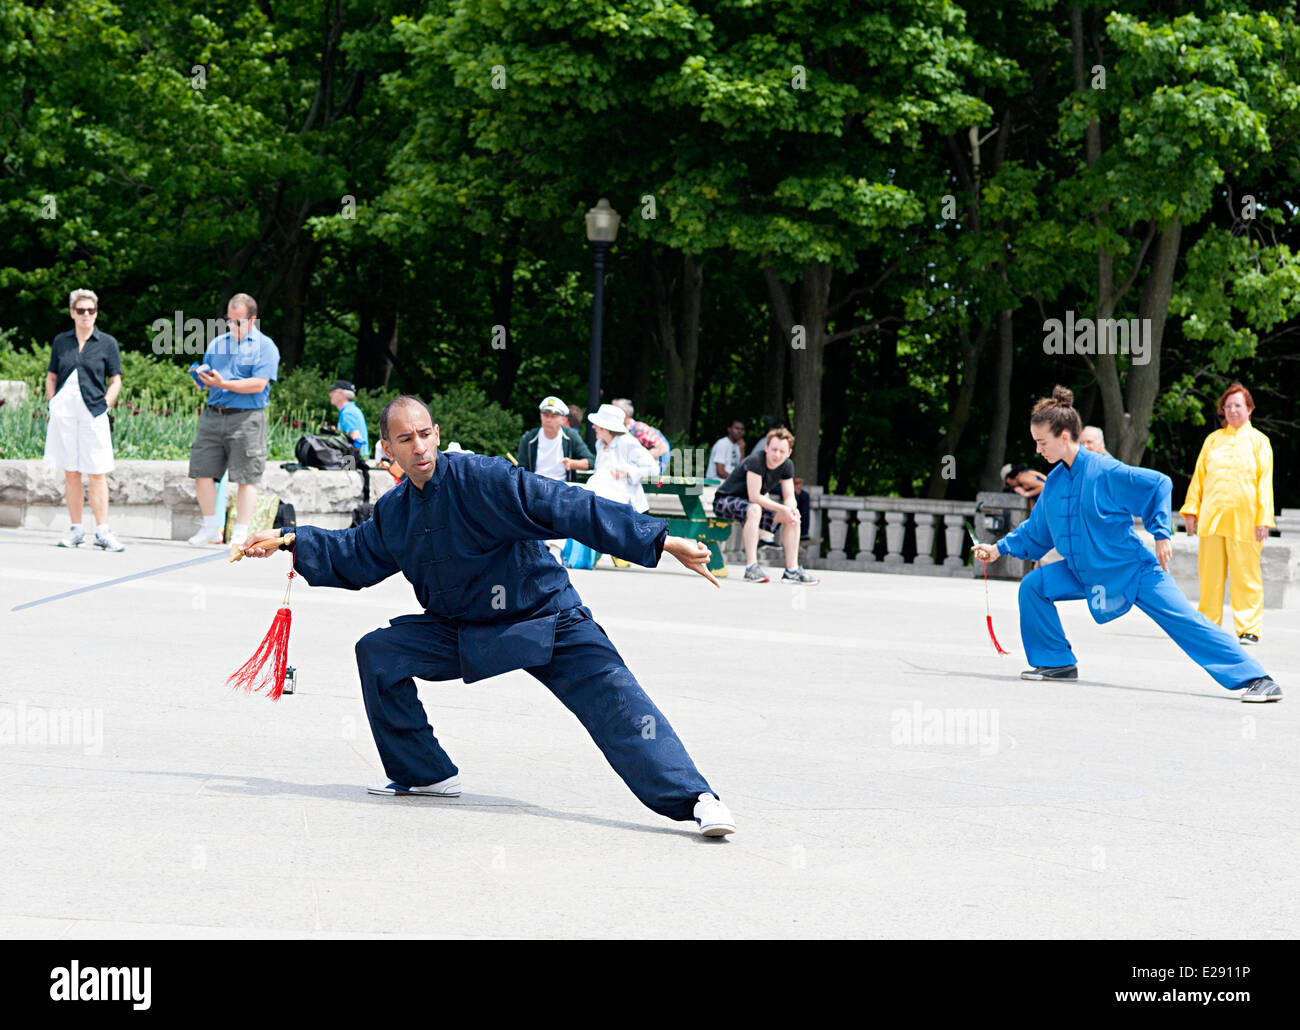 Tai chi professionals exercise on Mount Royal plaza in Montreal, Quebec Canada. Stock Photo